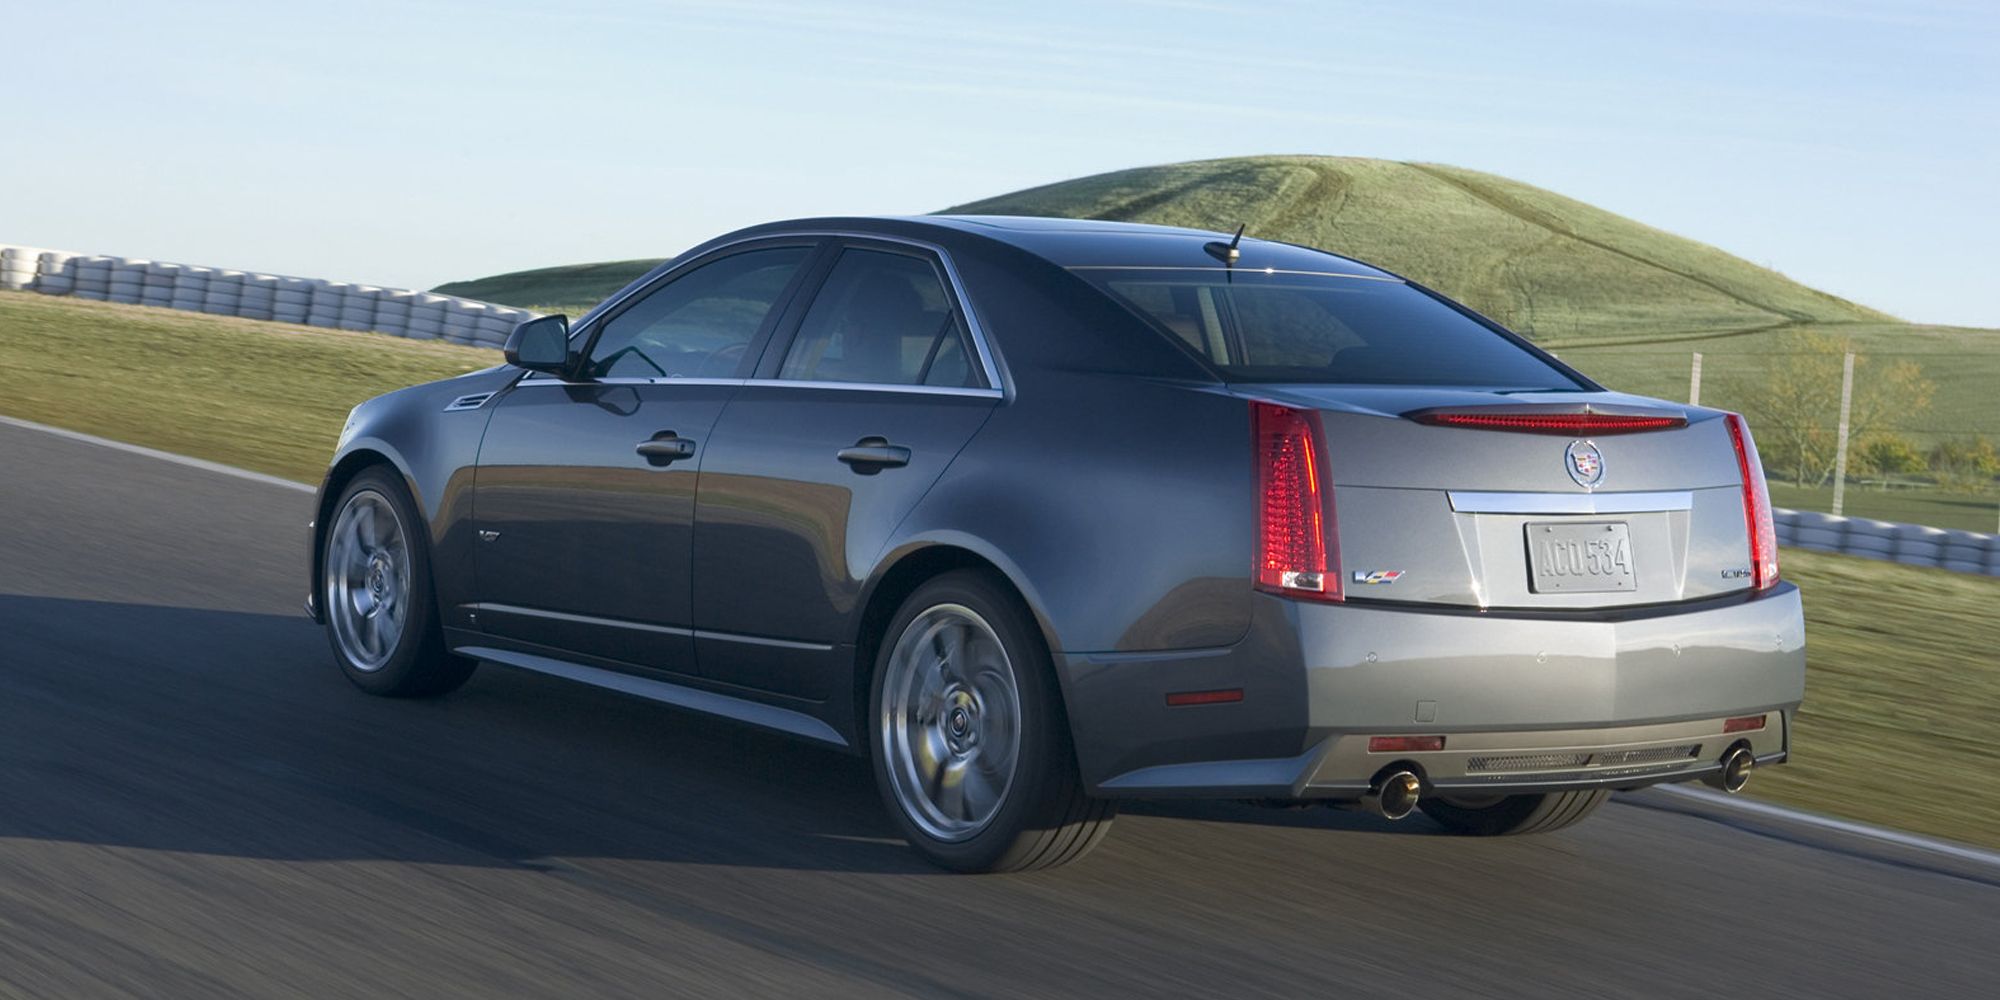 Rear 3/4 view of a silver CTS-V sedan on the move on a race track